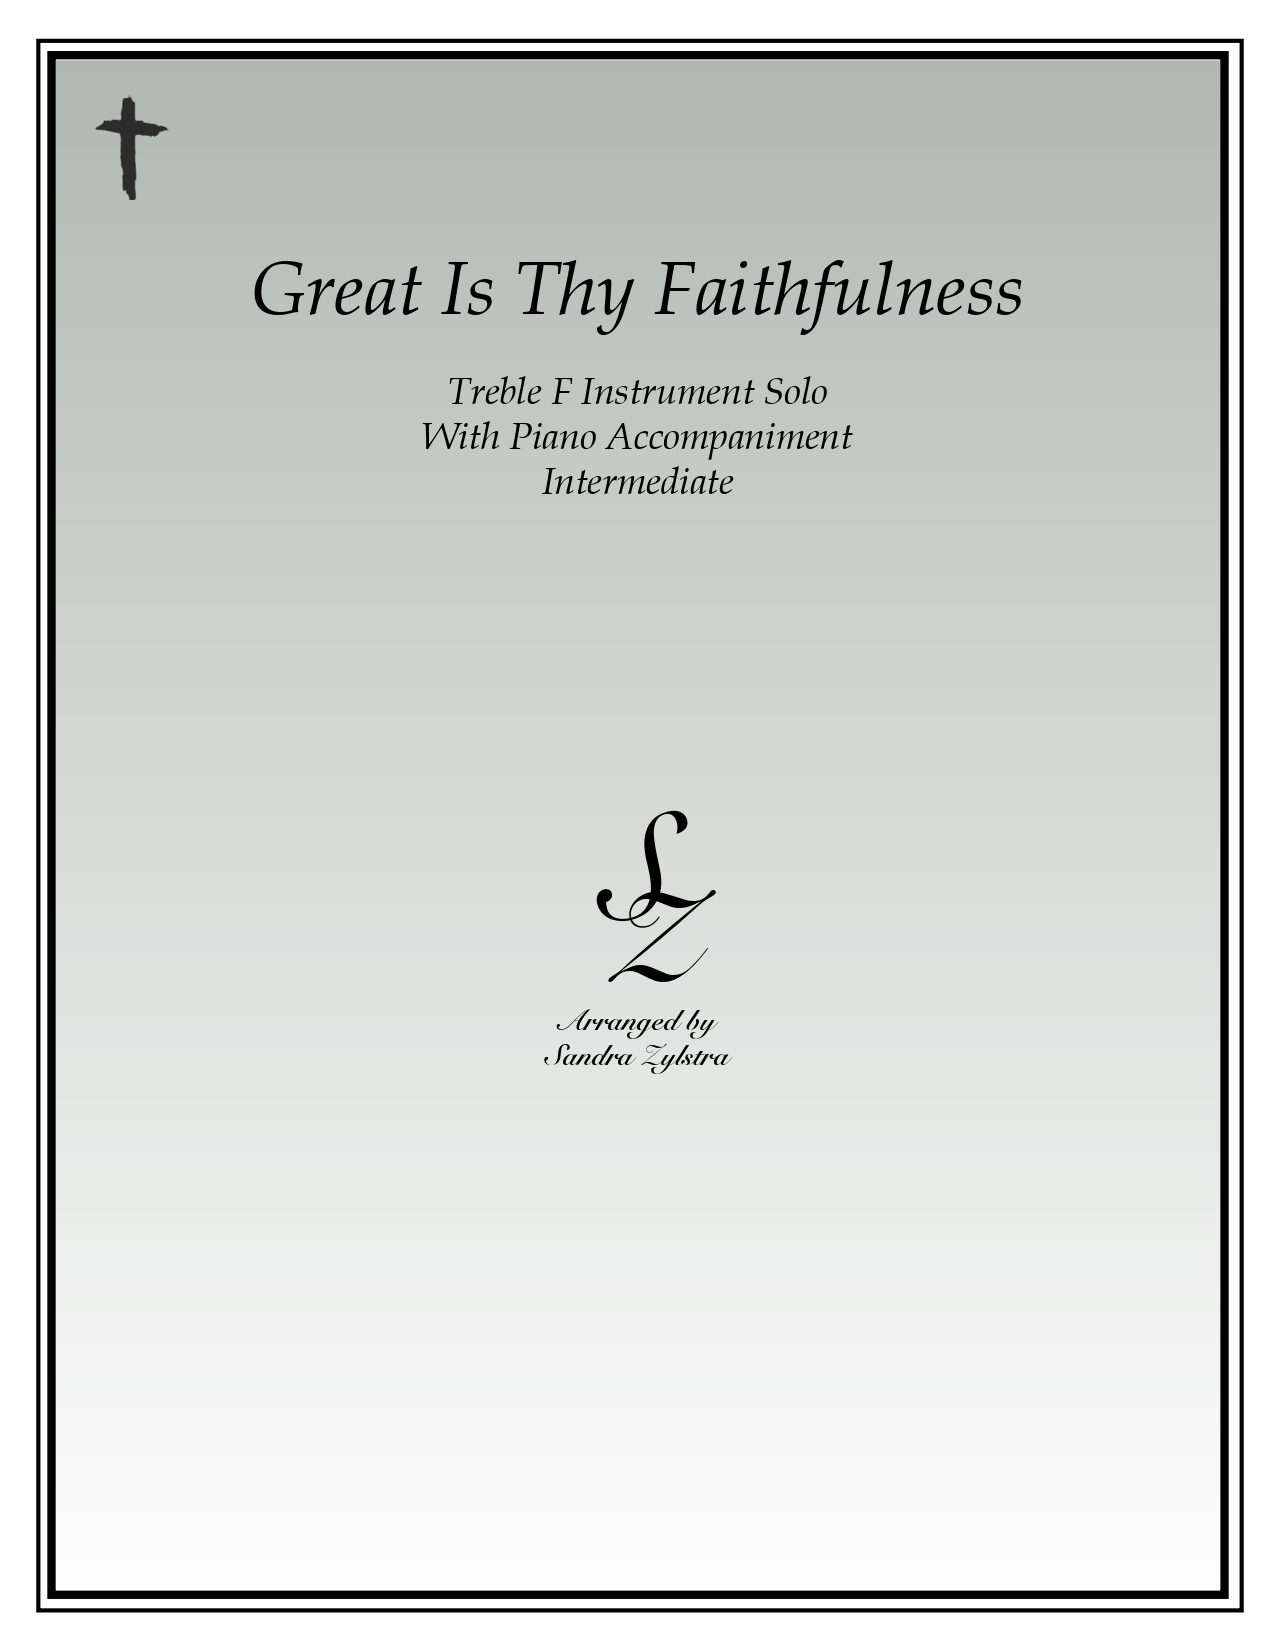 Great Is Thy Faithfulness F instrument solo part cover page 00011